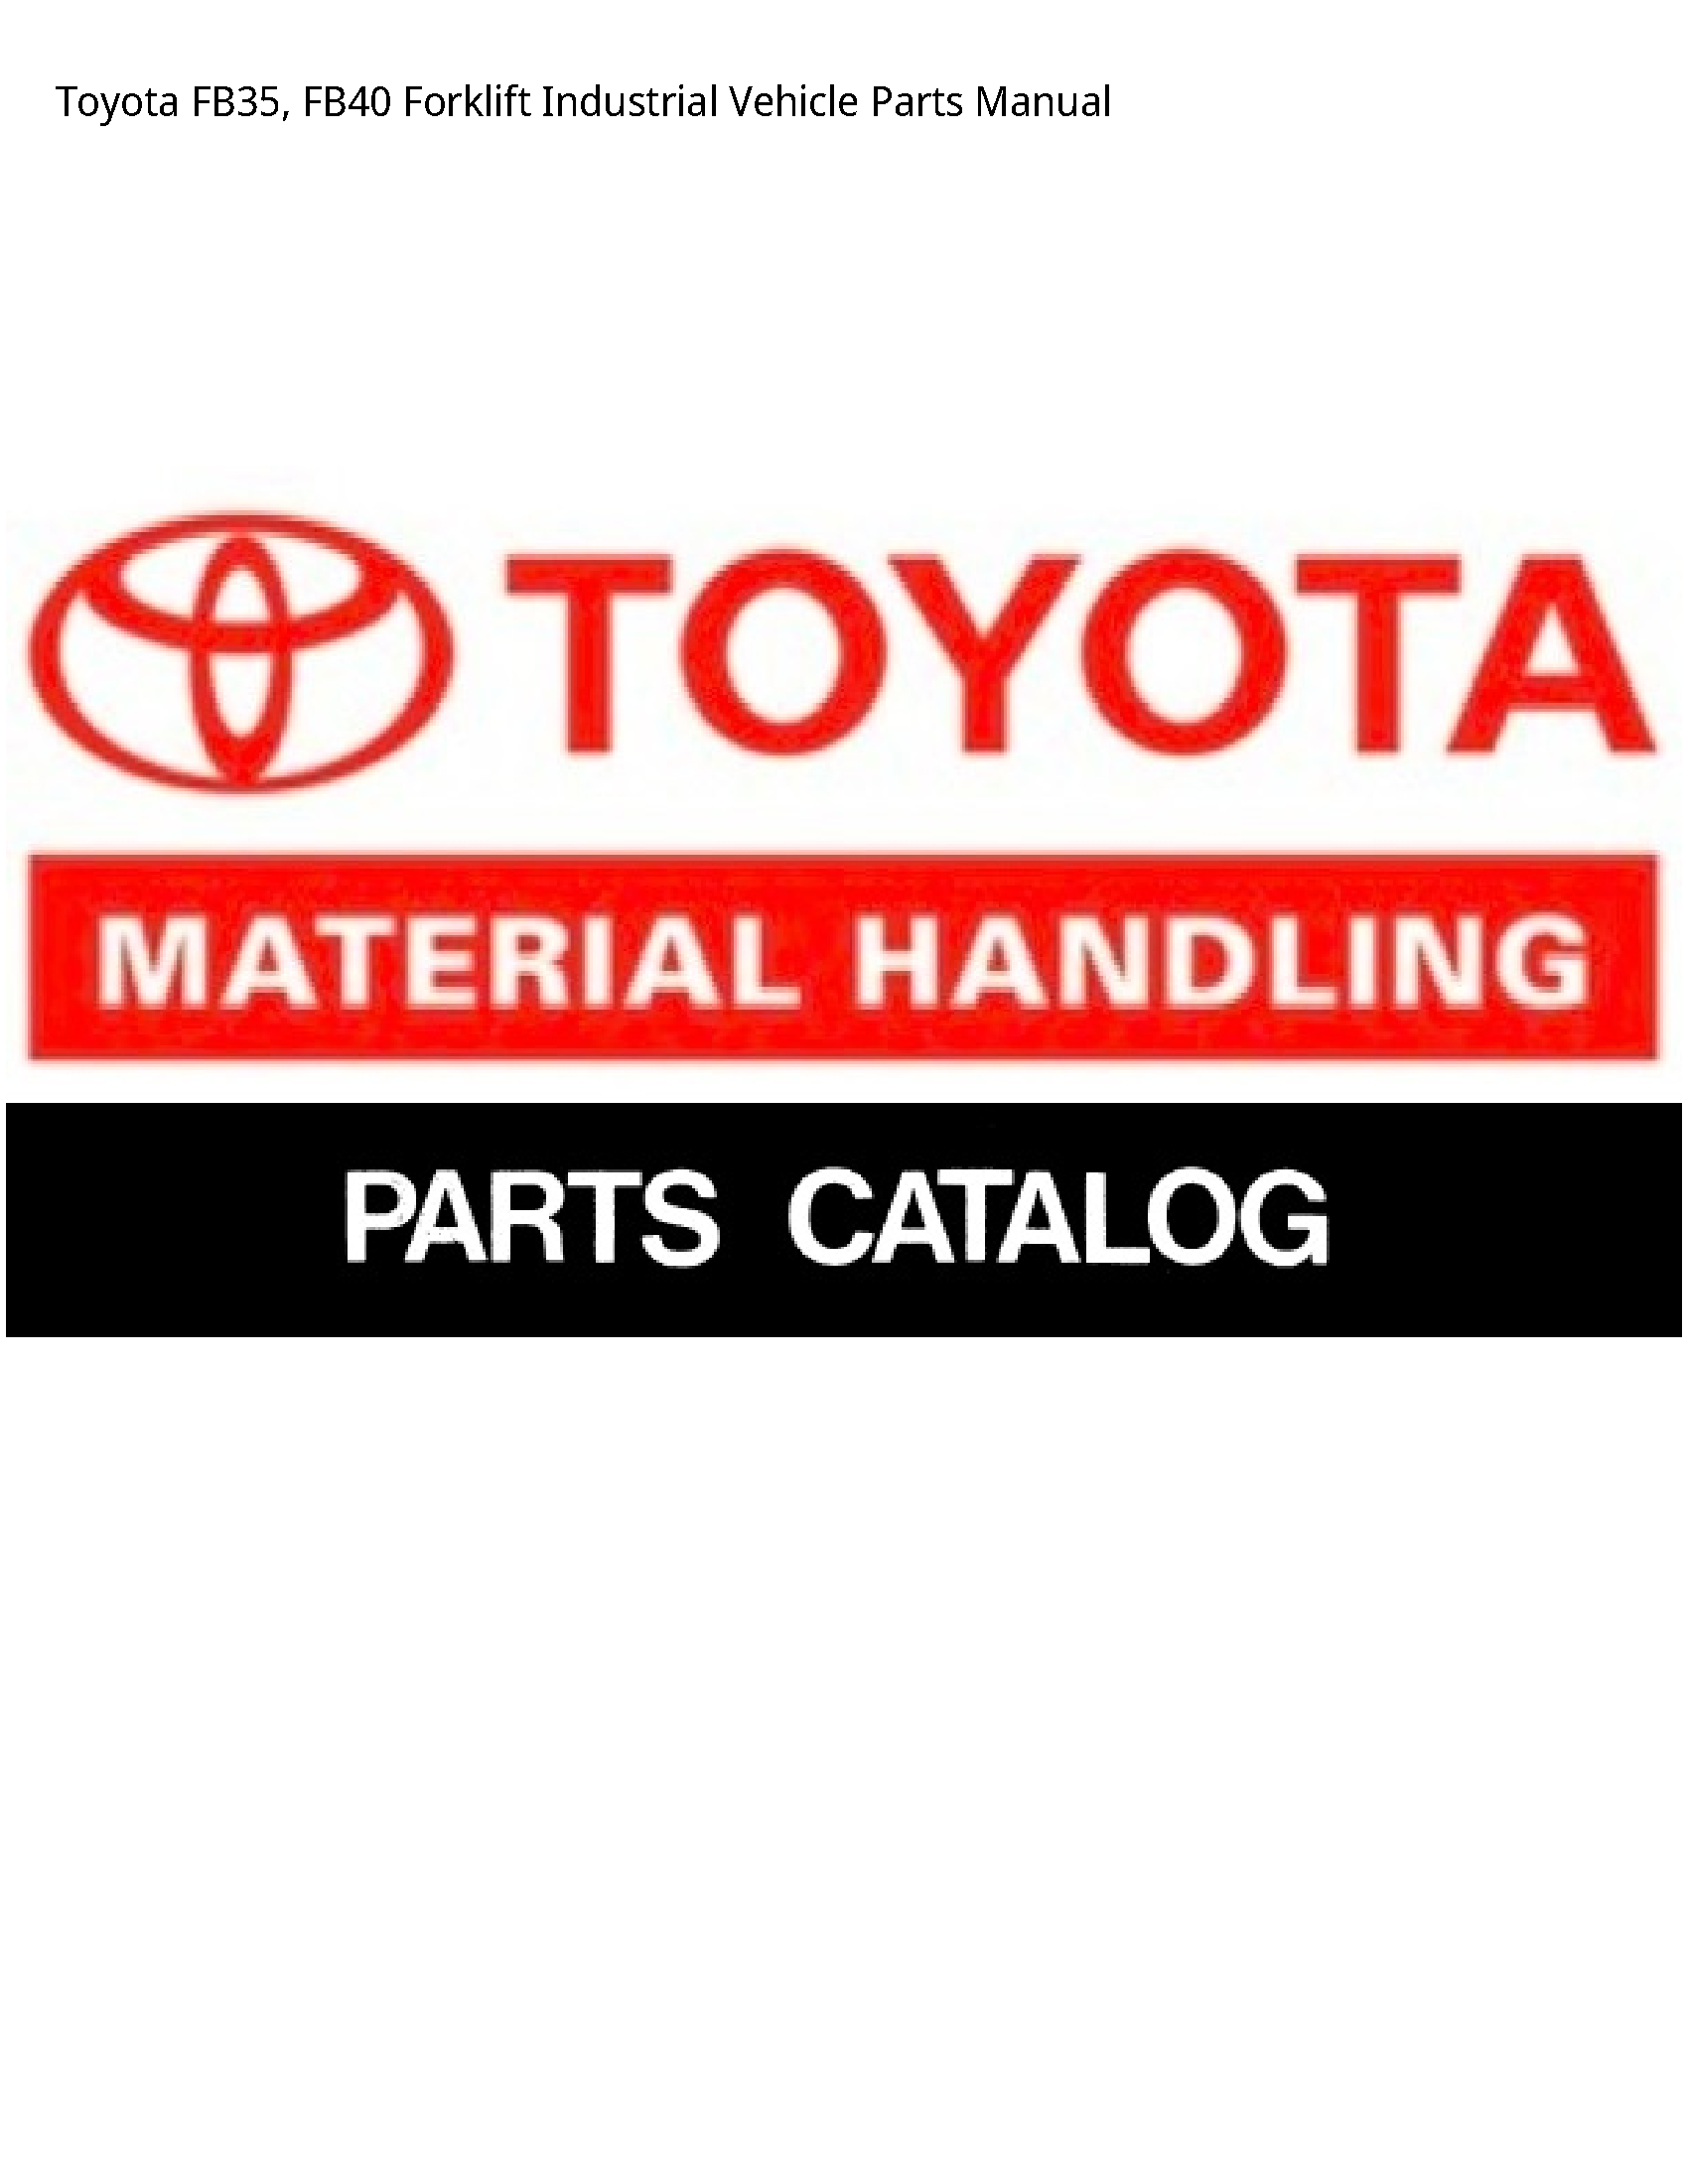 Toyota FB35 Forklift Industrial Vehicle Parts manual